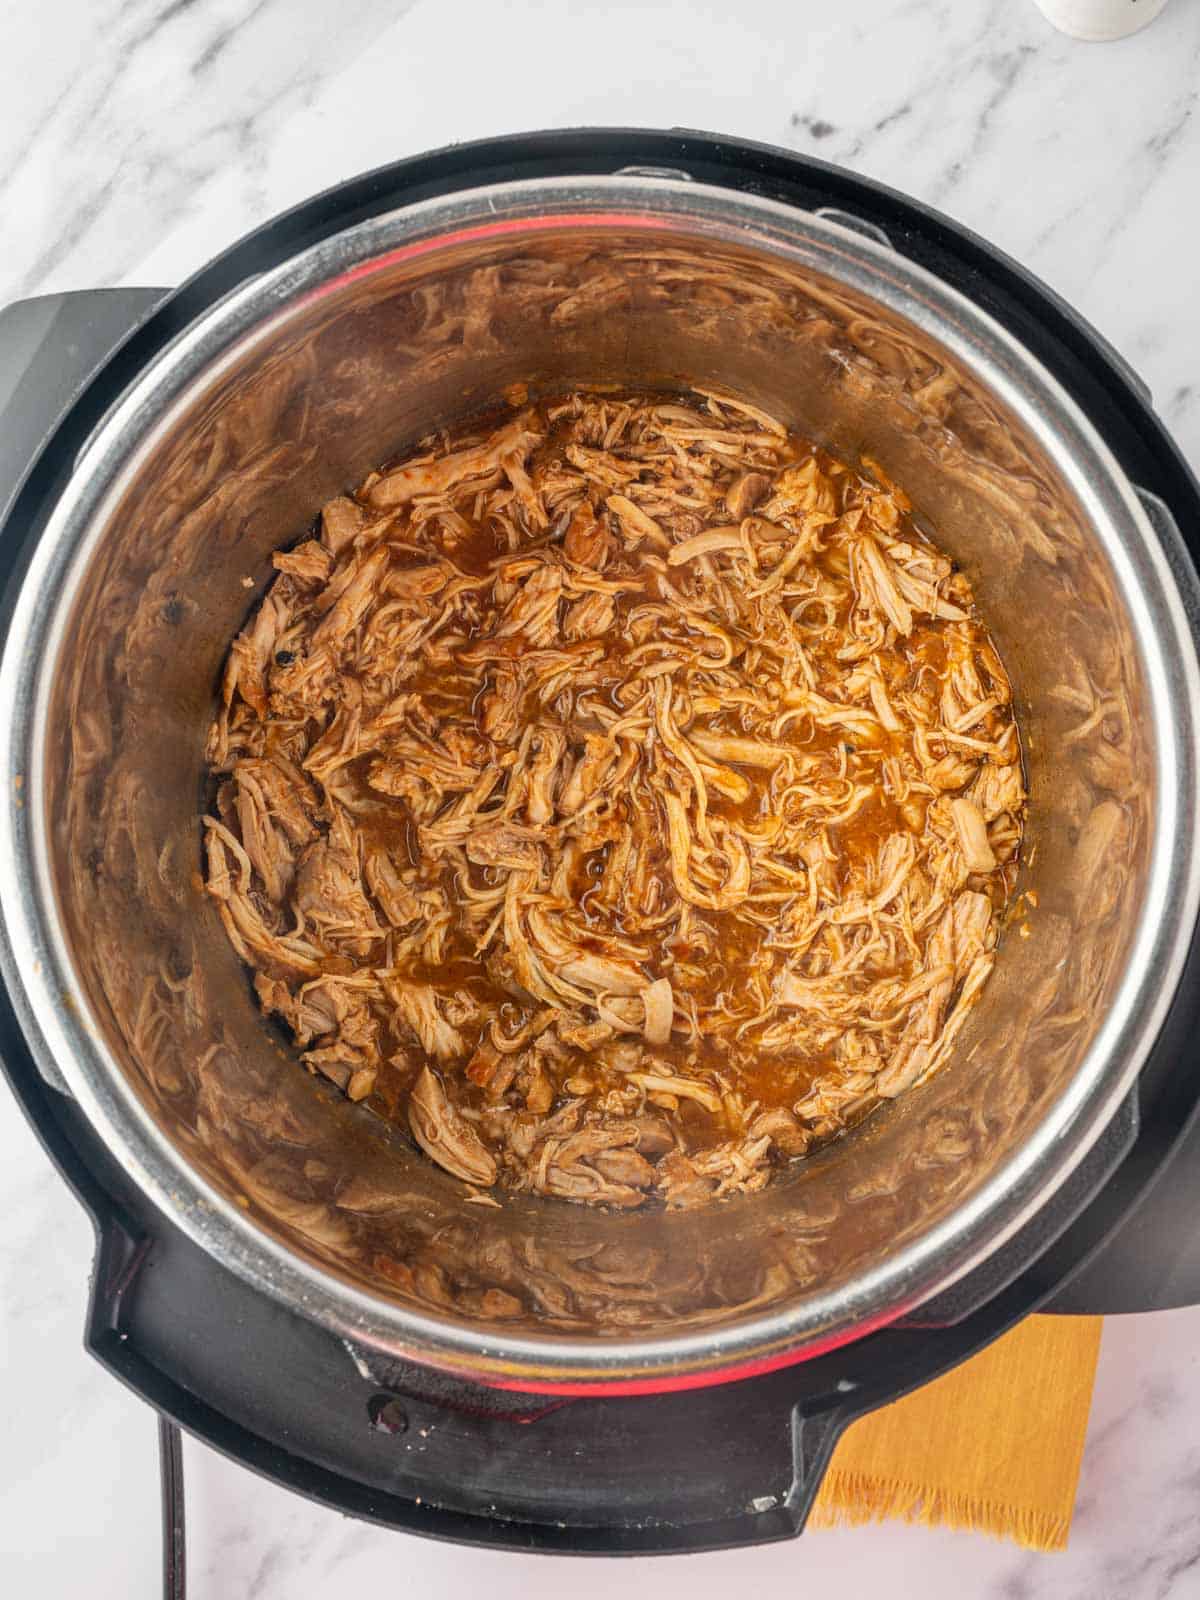 Shredded chicken with bbq sauce in the bottom of an instant pot.